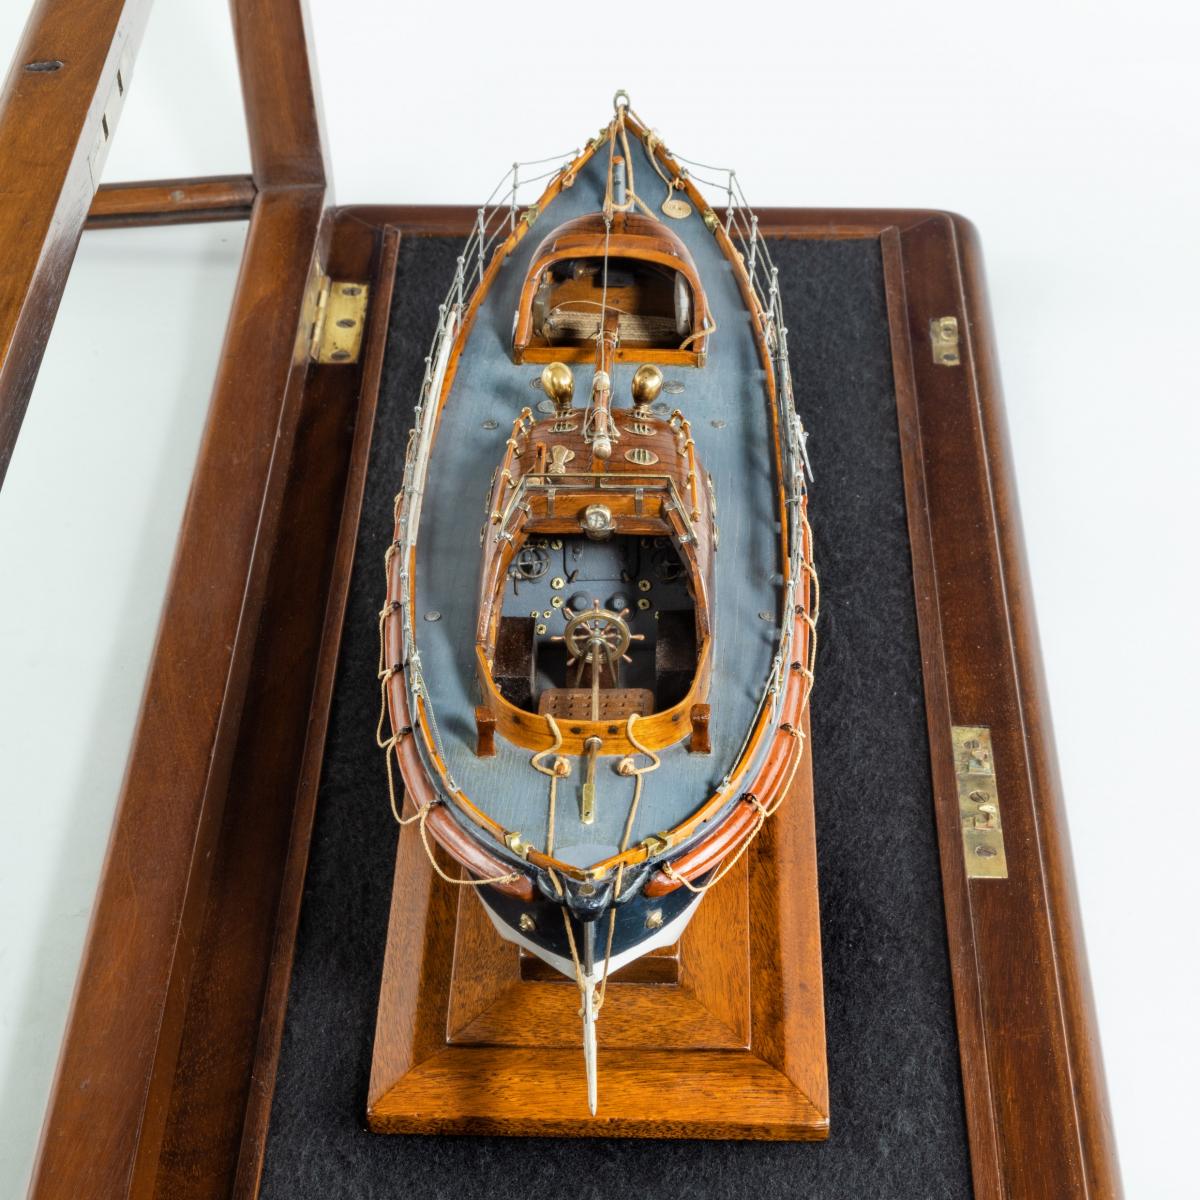 A scale model of a ‘Watson’ class lifeboat, circa 1931